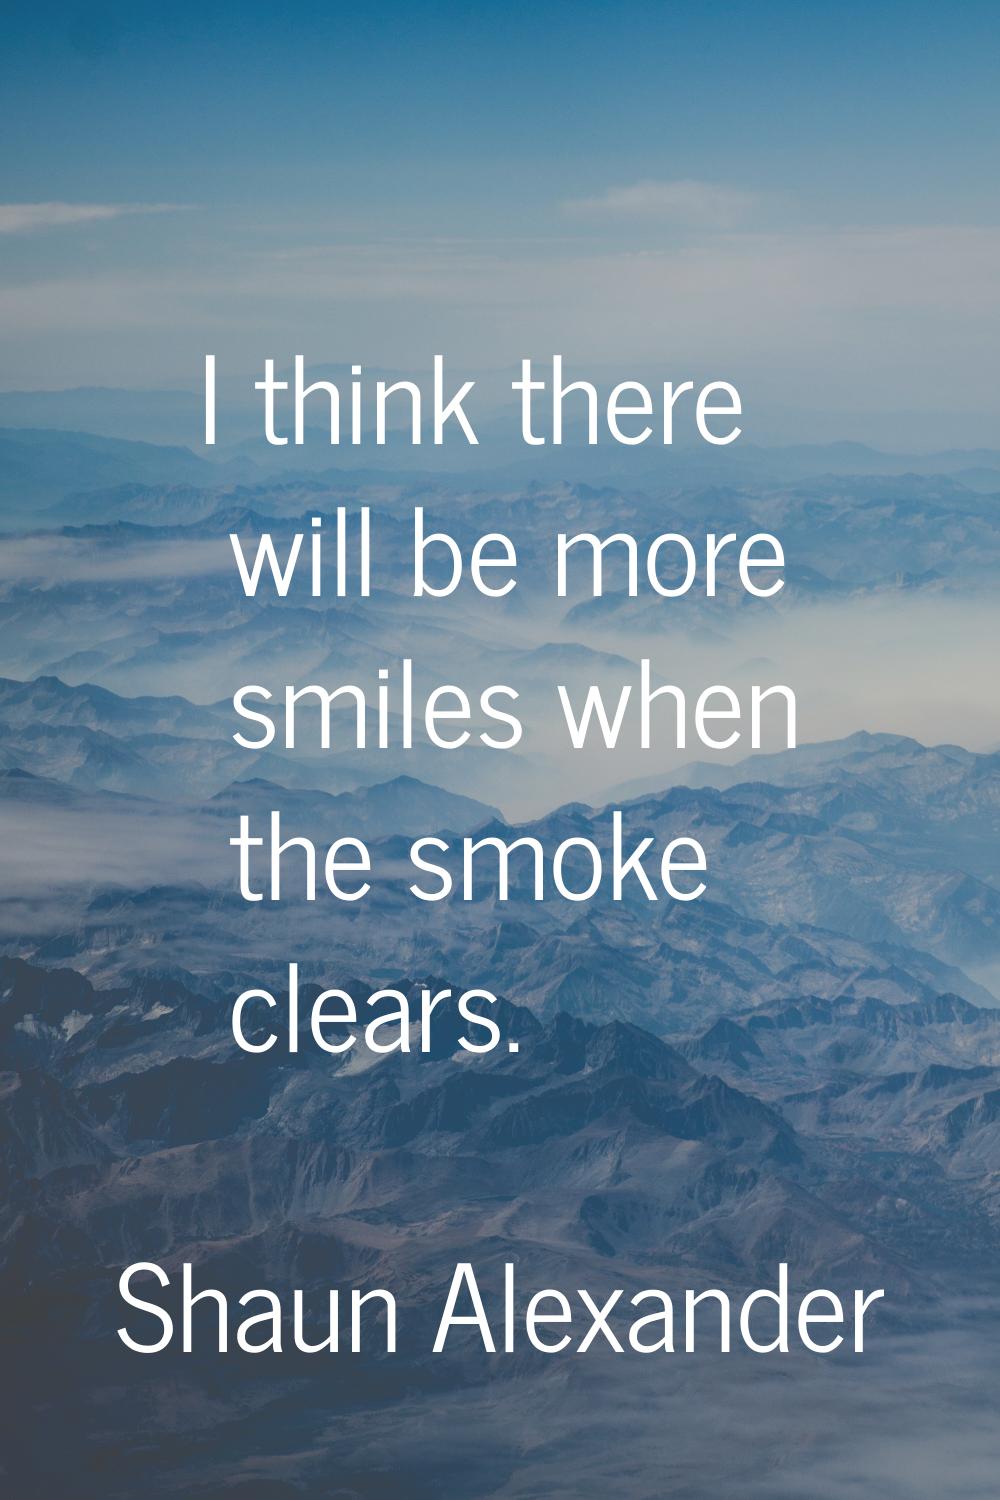 I think there will be more smiles when the smoke clears.